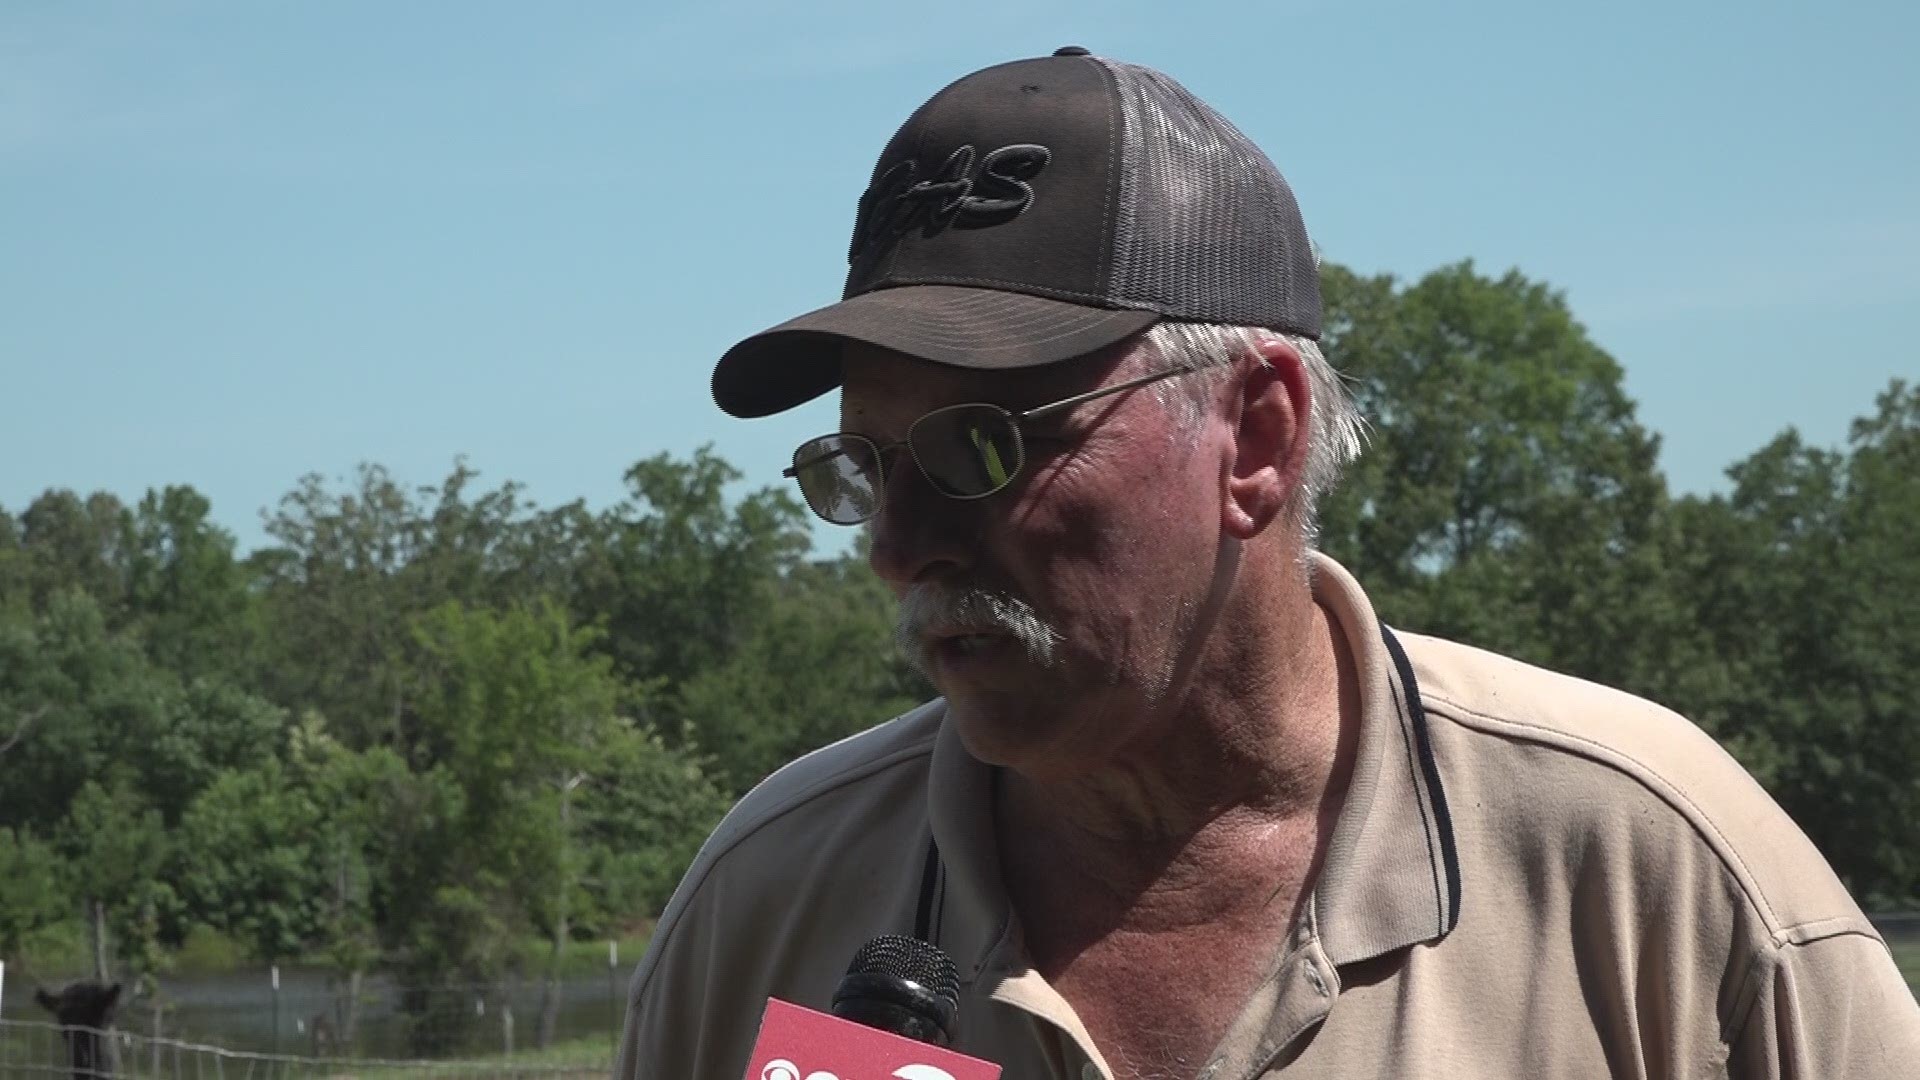 Gary Smith with the Nesbitt Fire Department gives advice to East Texas residents following early morning tornado